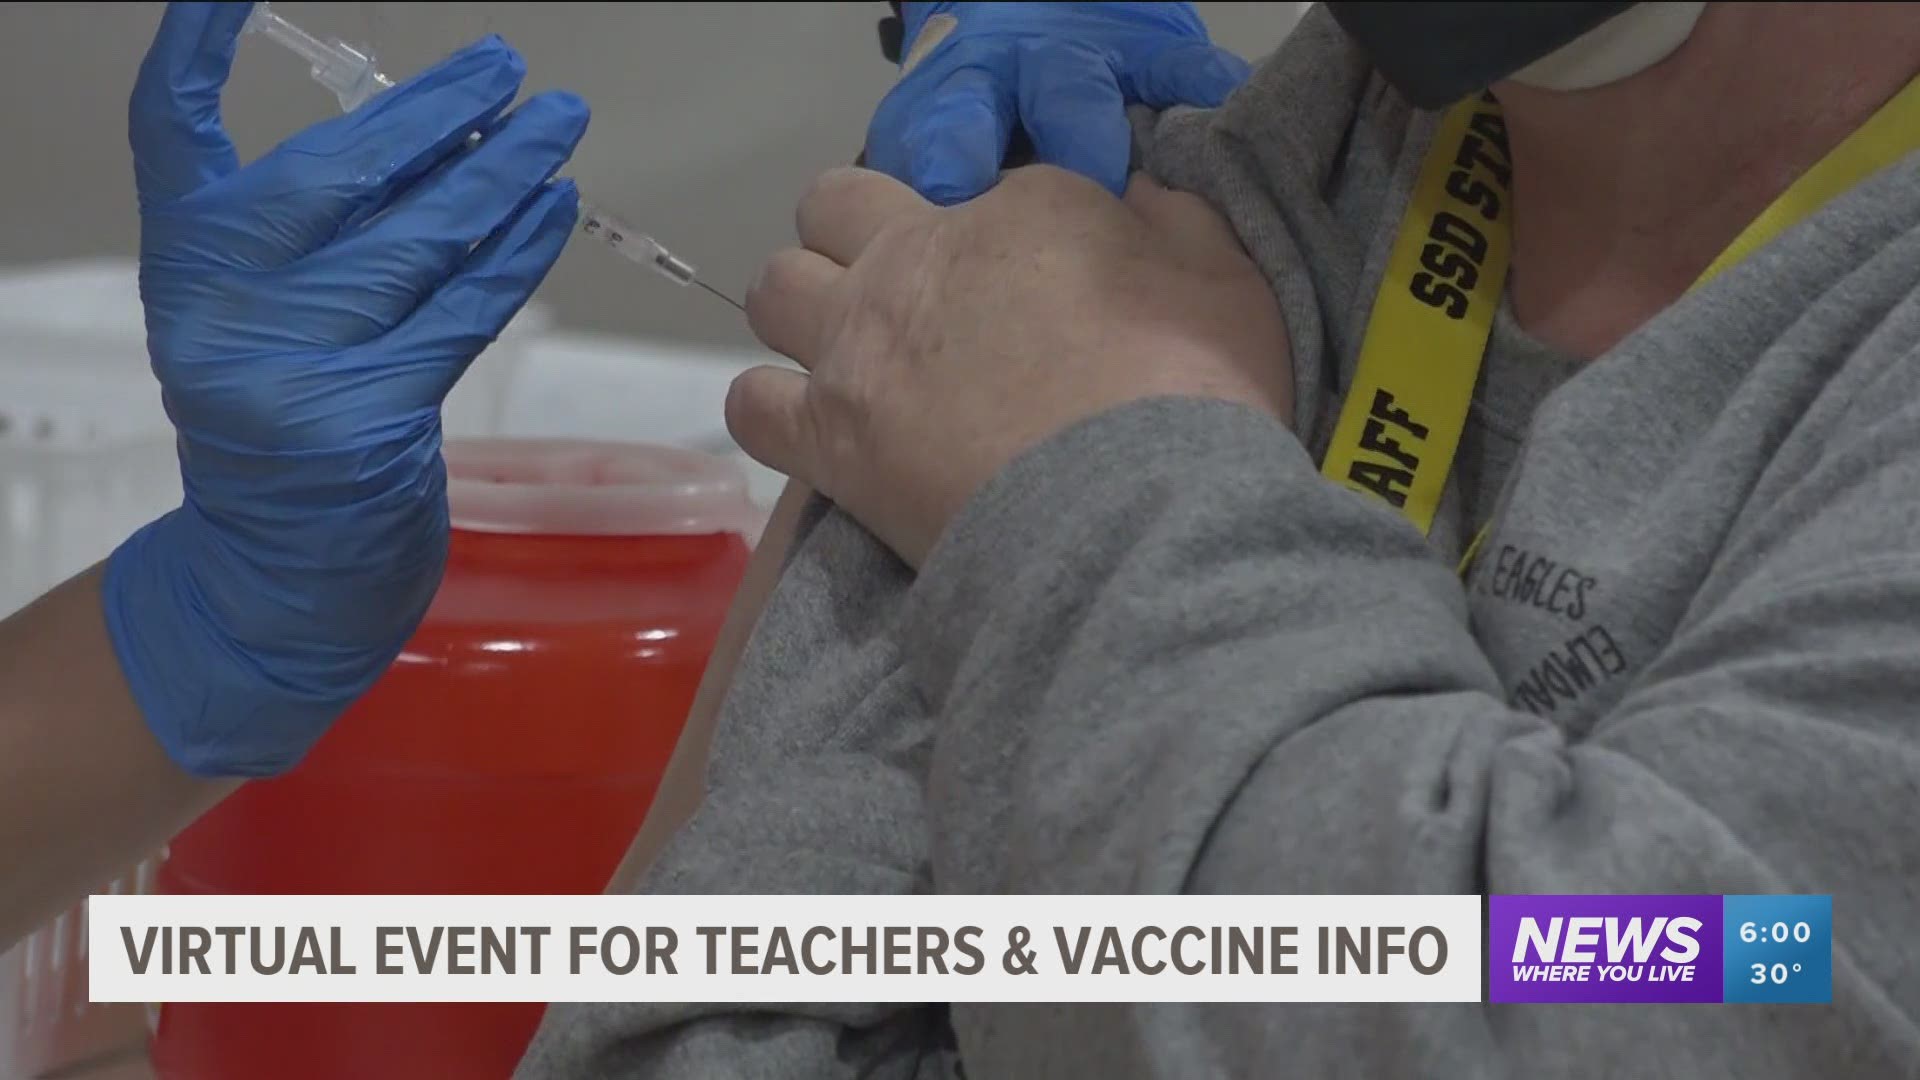 Virtual event held for teachers to receive Covid-19 vaccine information